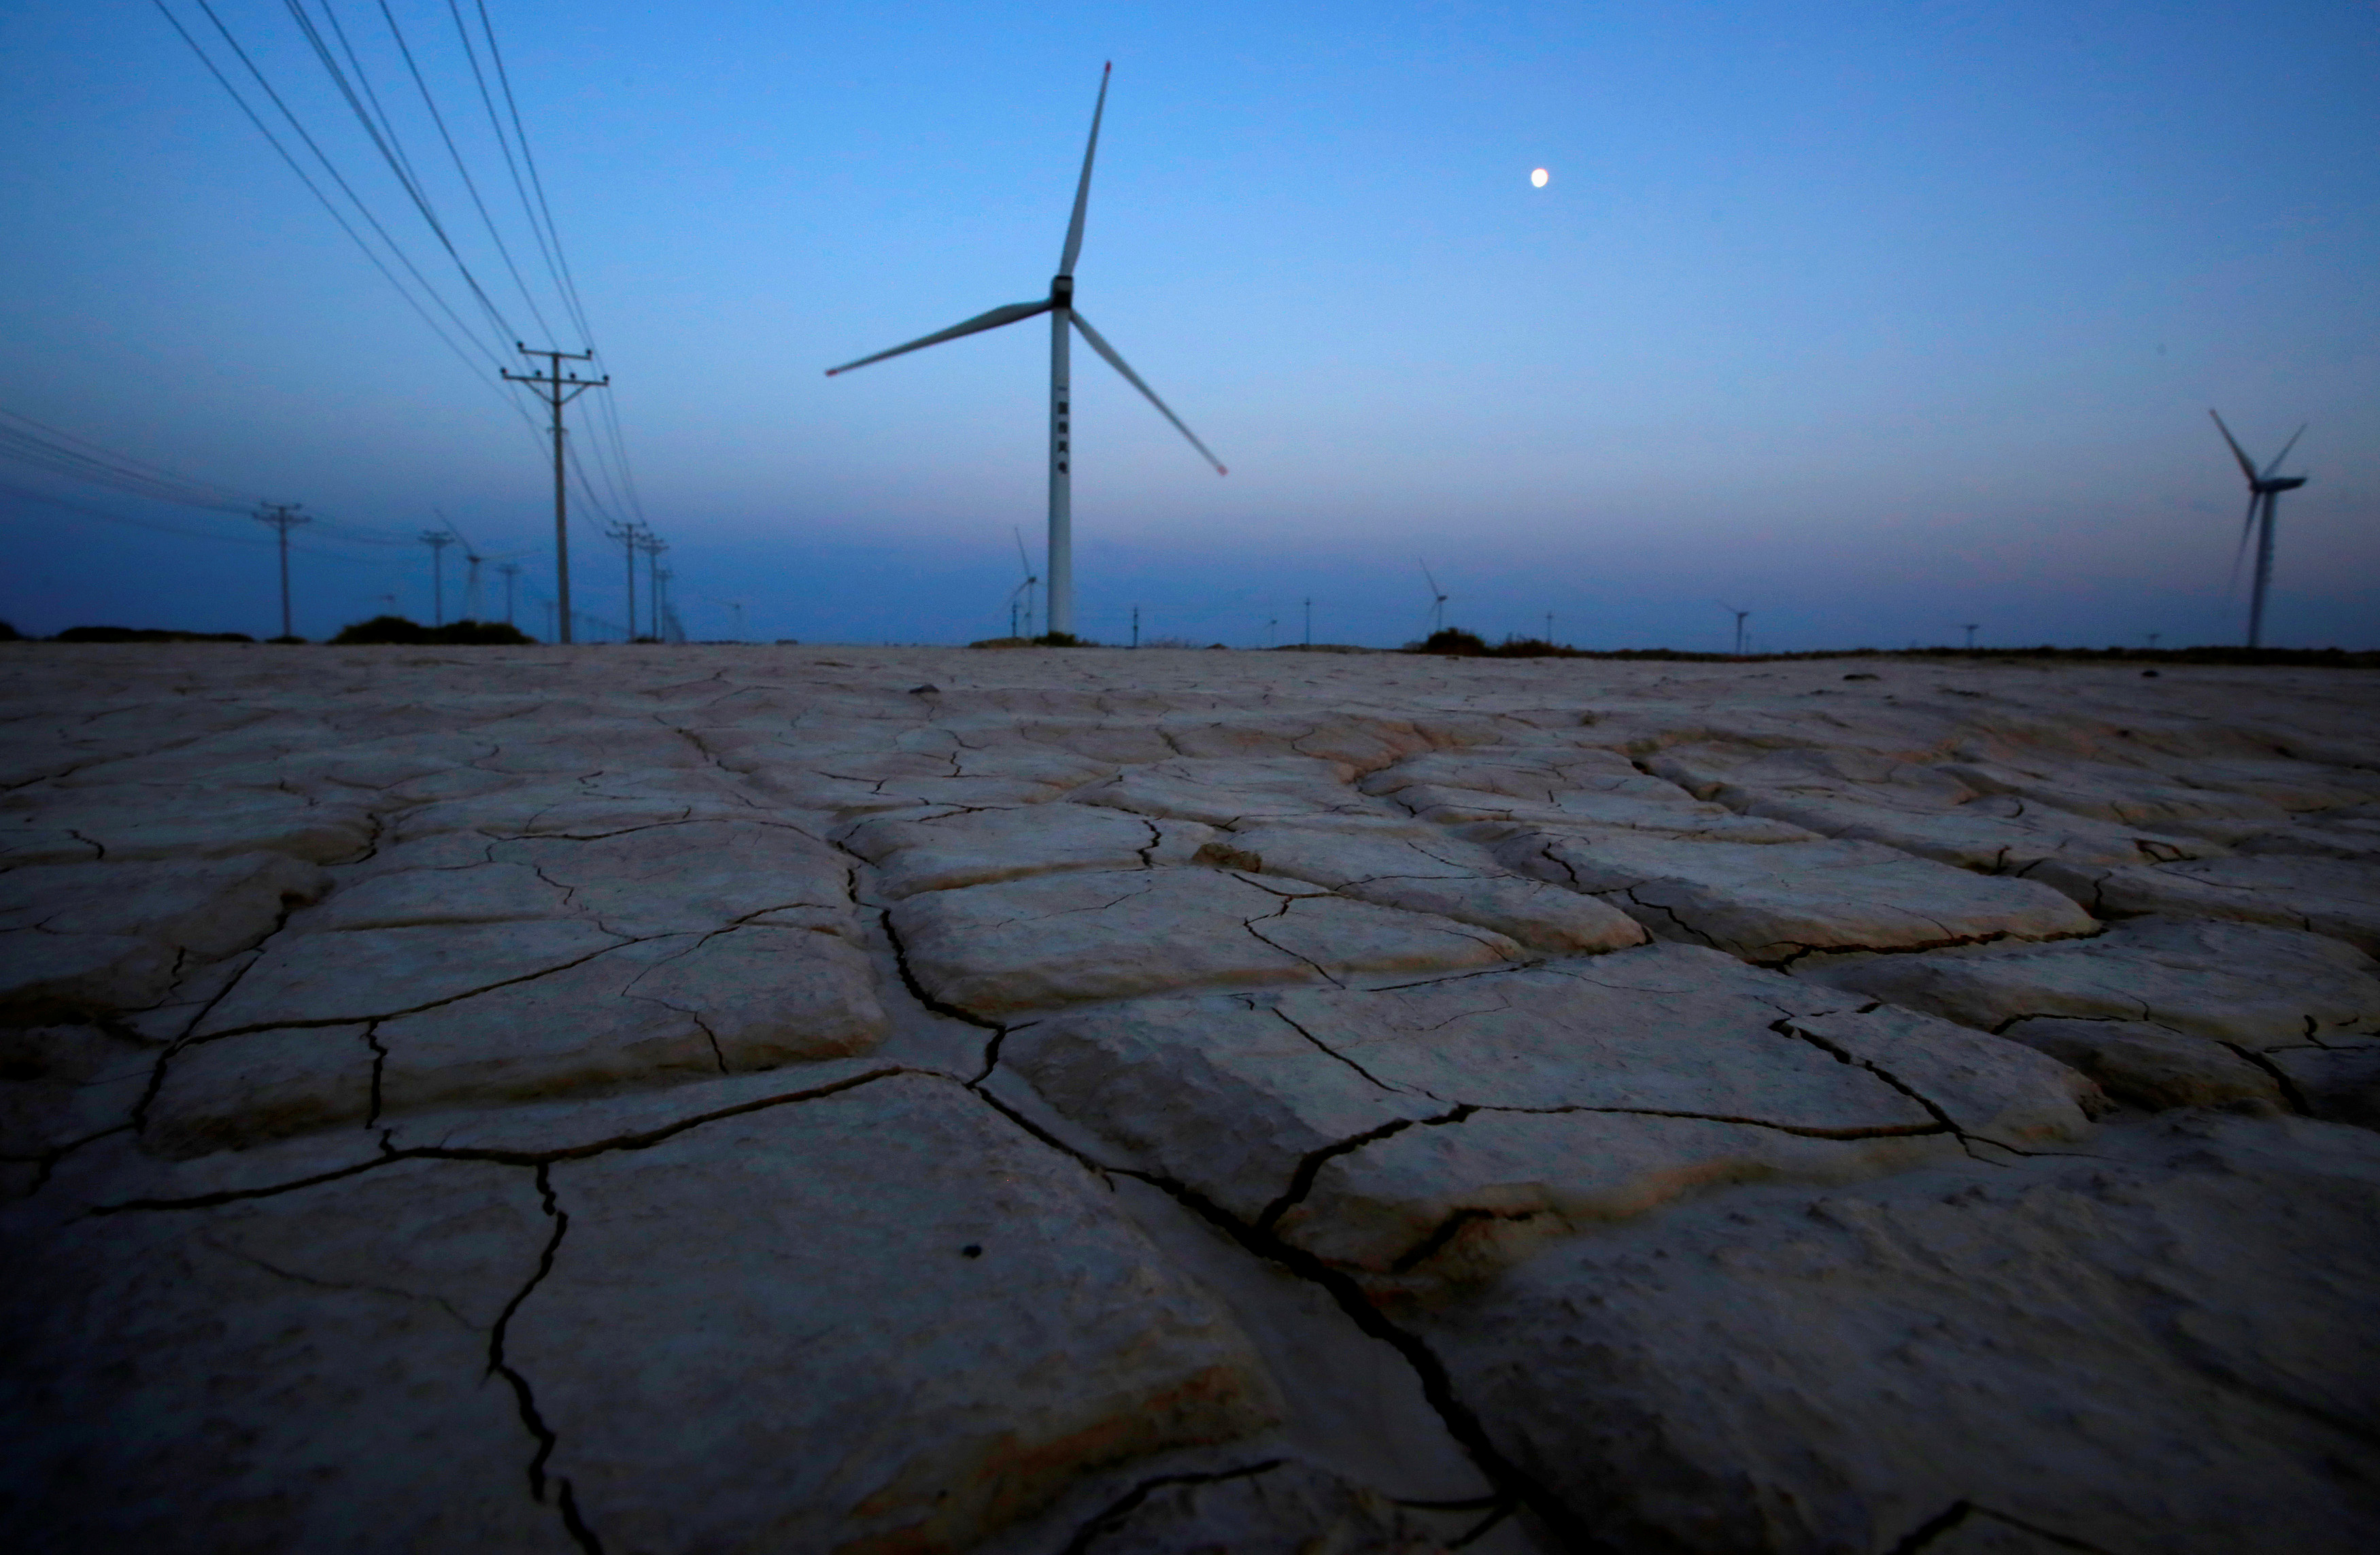 Cracked earth marks a dried-up area near a wind turbine used to generate electricity at a wind farm in Guazhou, 950km (590 miles) northwest of Lanzhou, Gansu Province